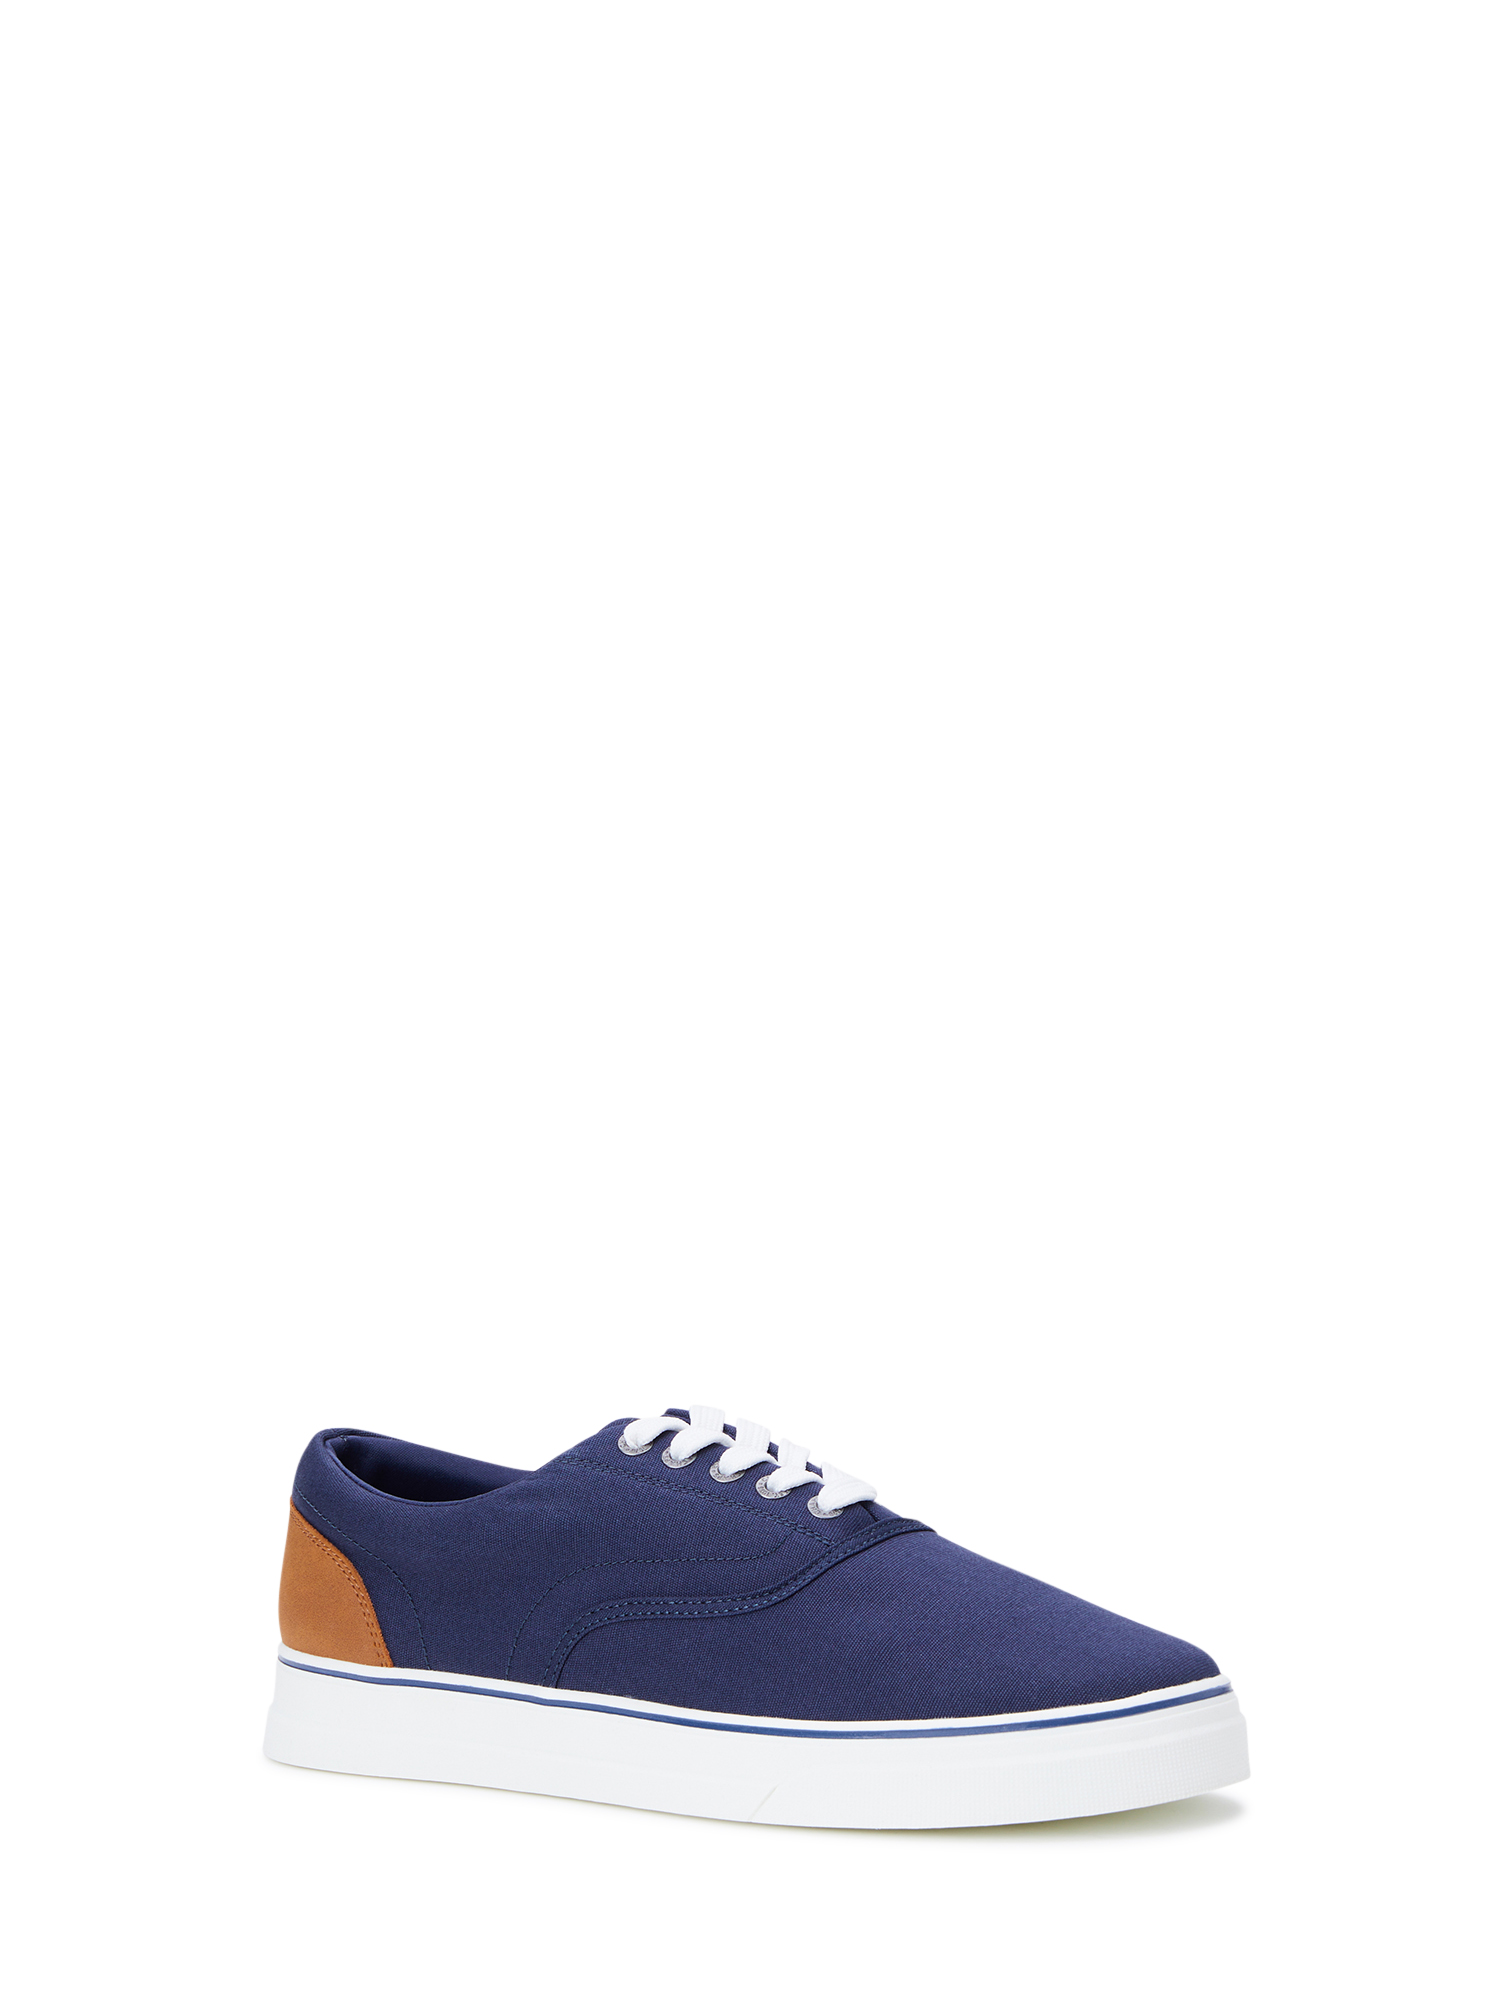 Casual Fabric Shoes - Gray | Benetton